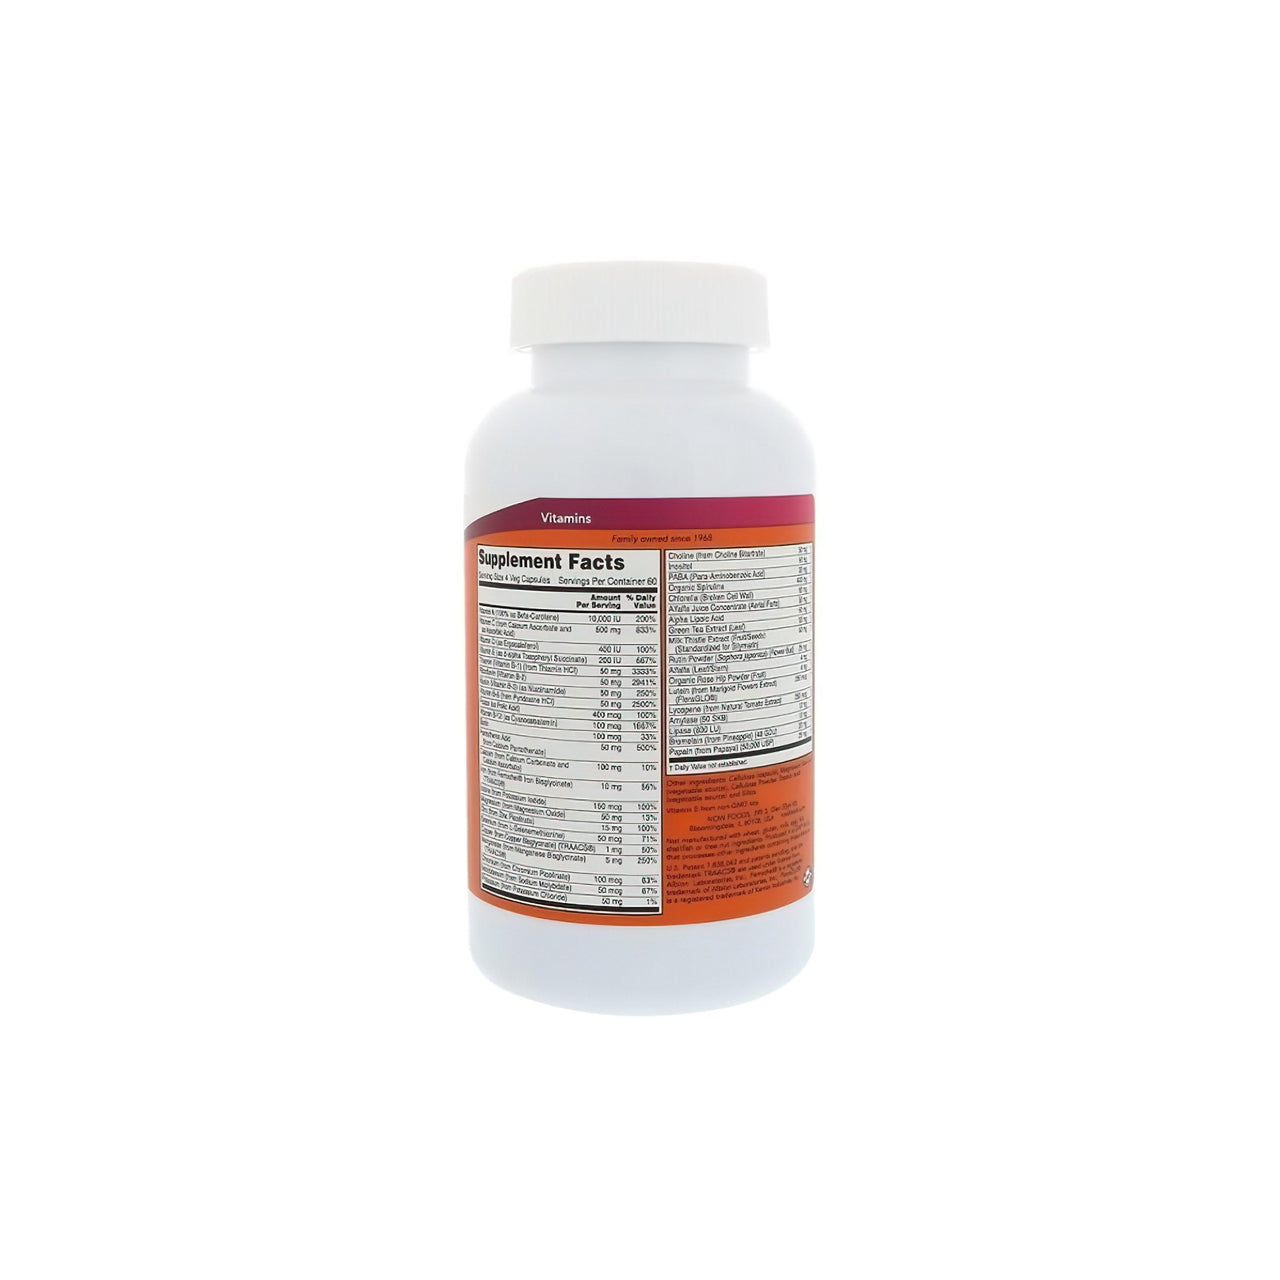 A bottle of Now Foods Special Two Multivitamin 240 vege capsules on a white background.